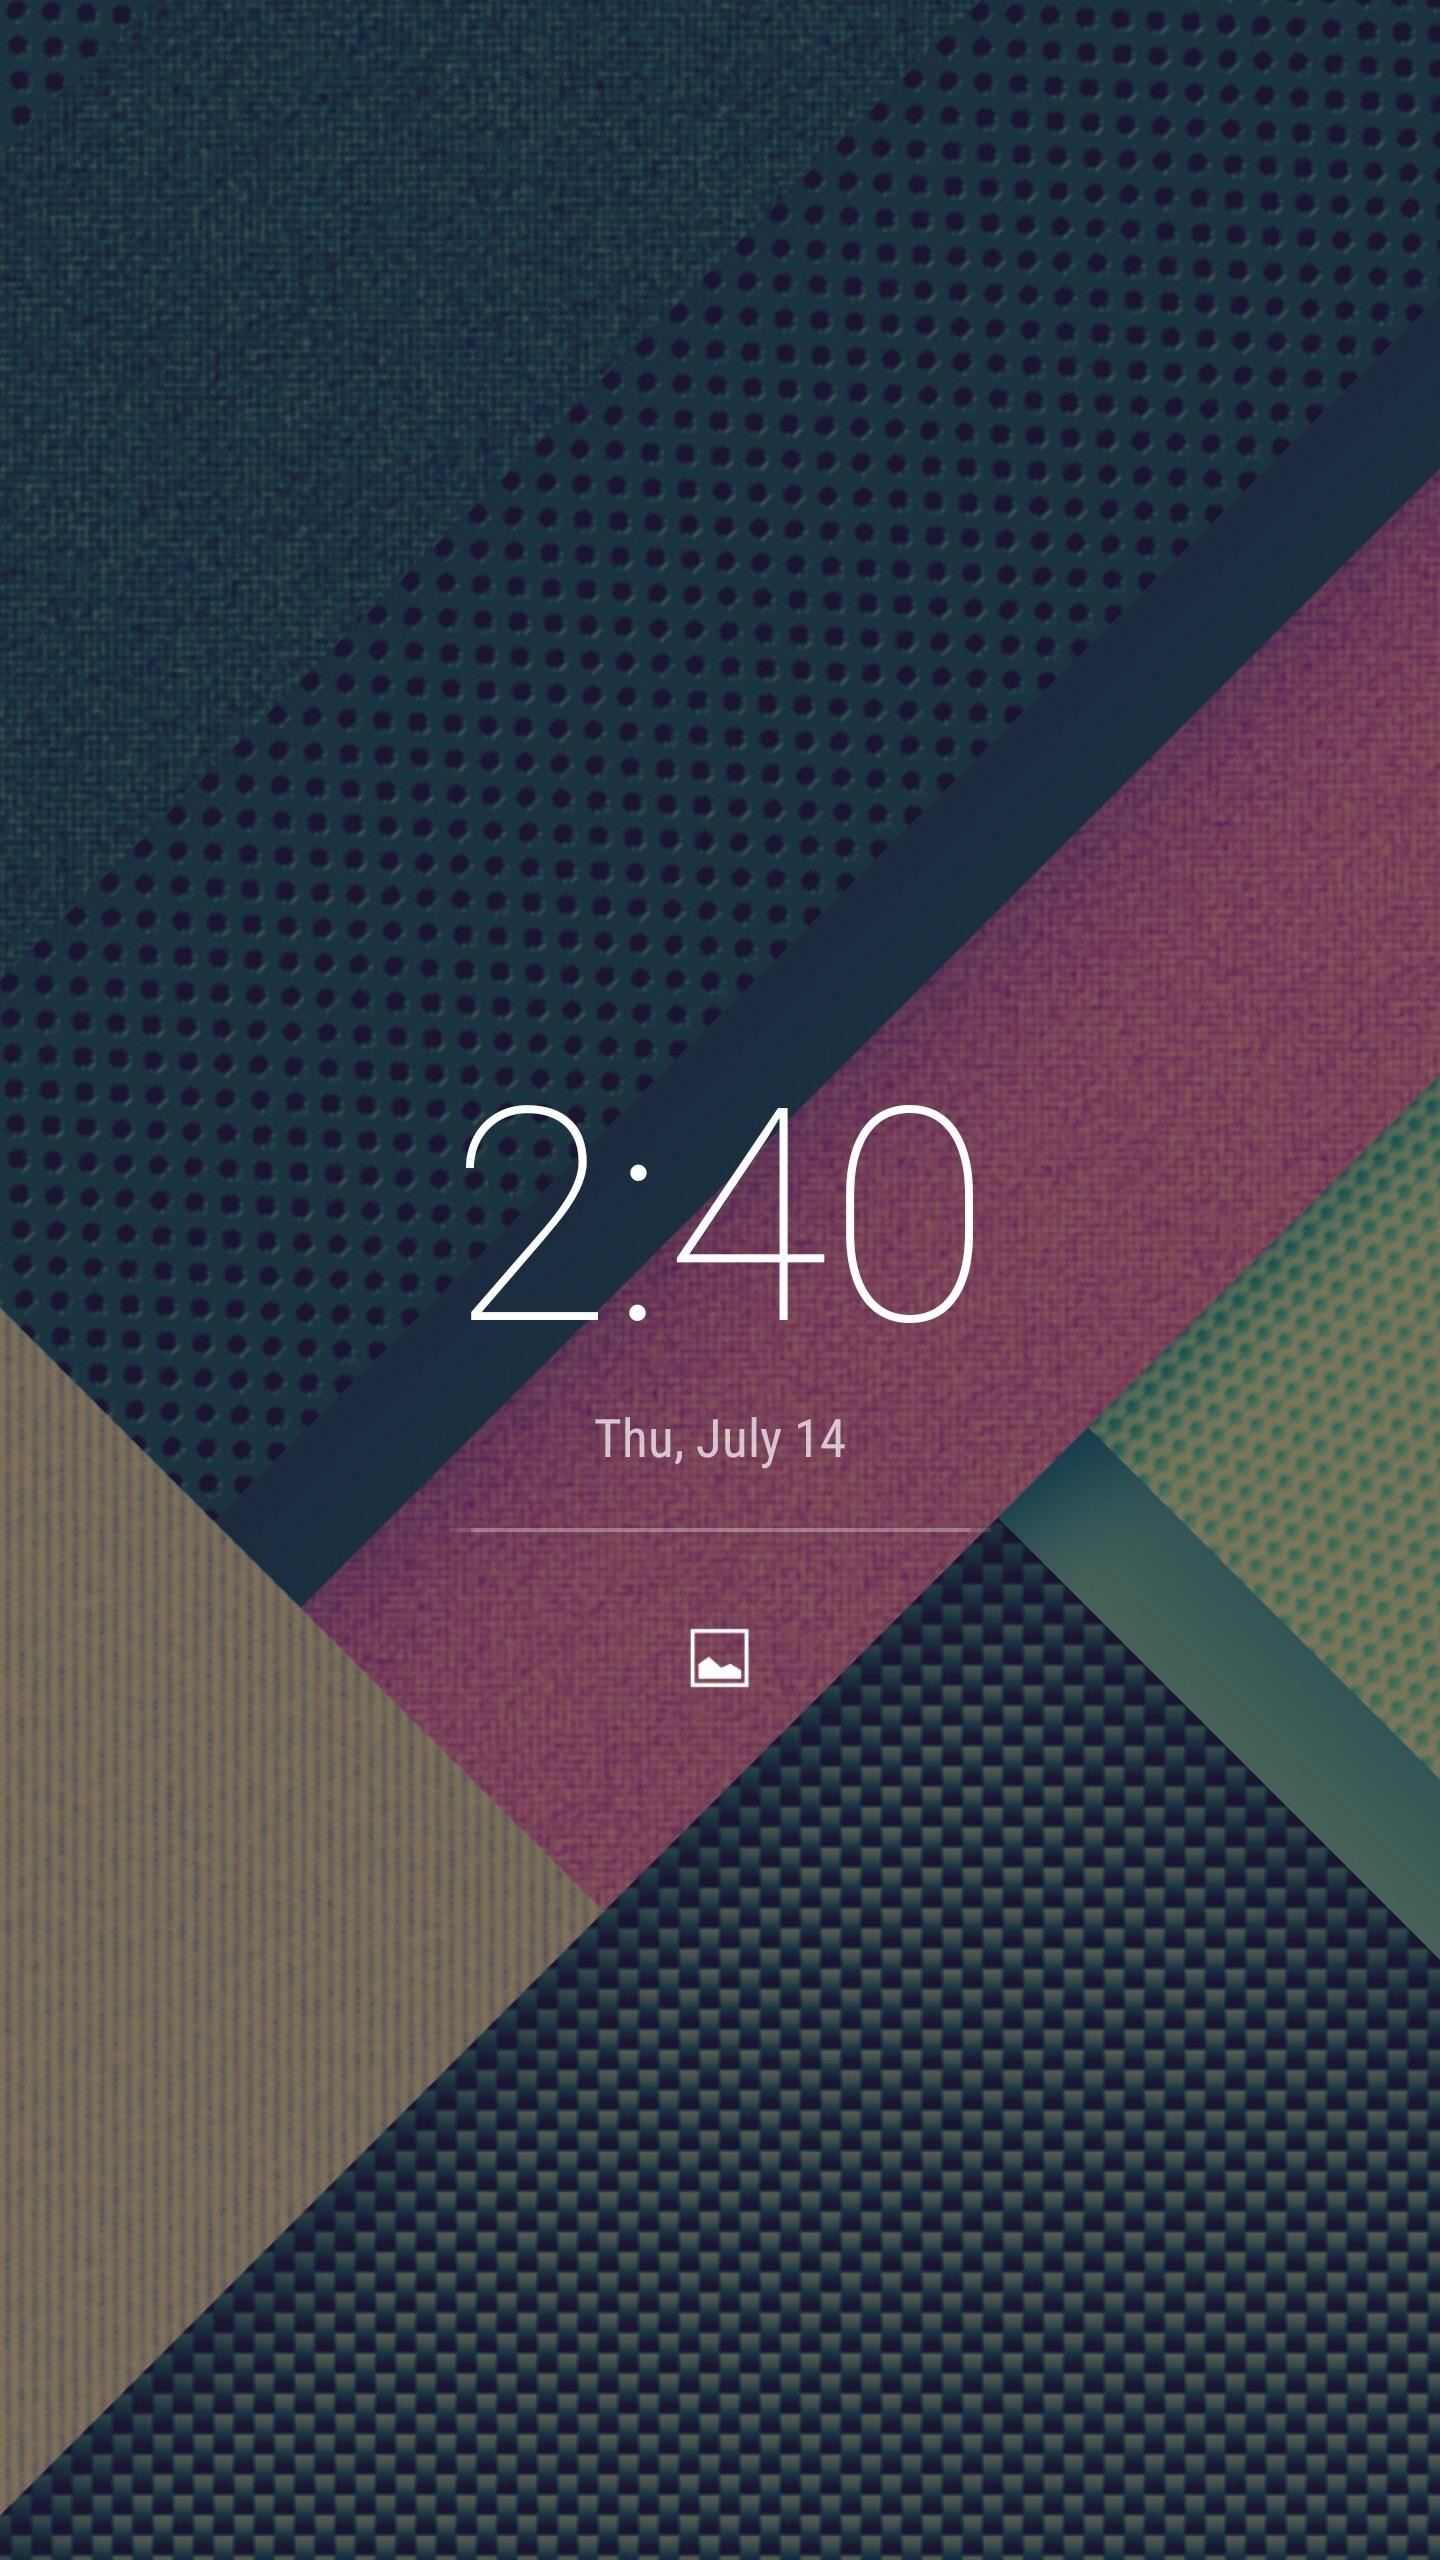 5 Great Lock Screens That Put Your Android's Default to Shame